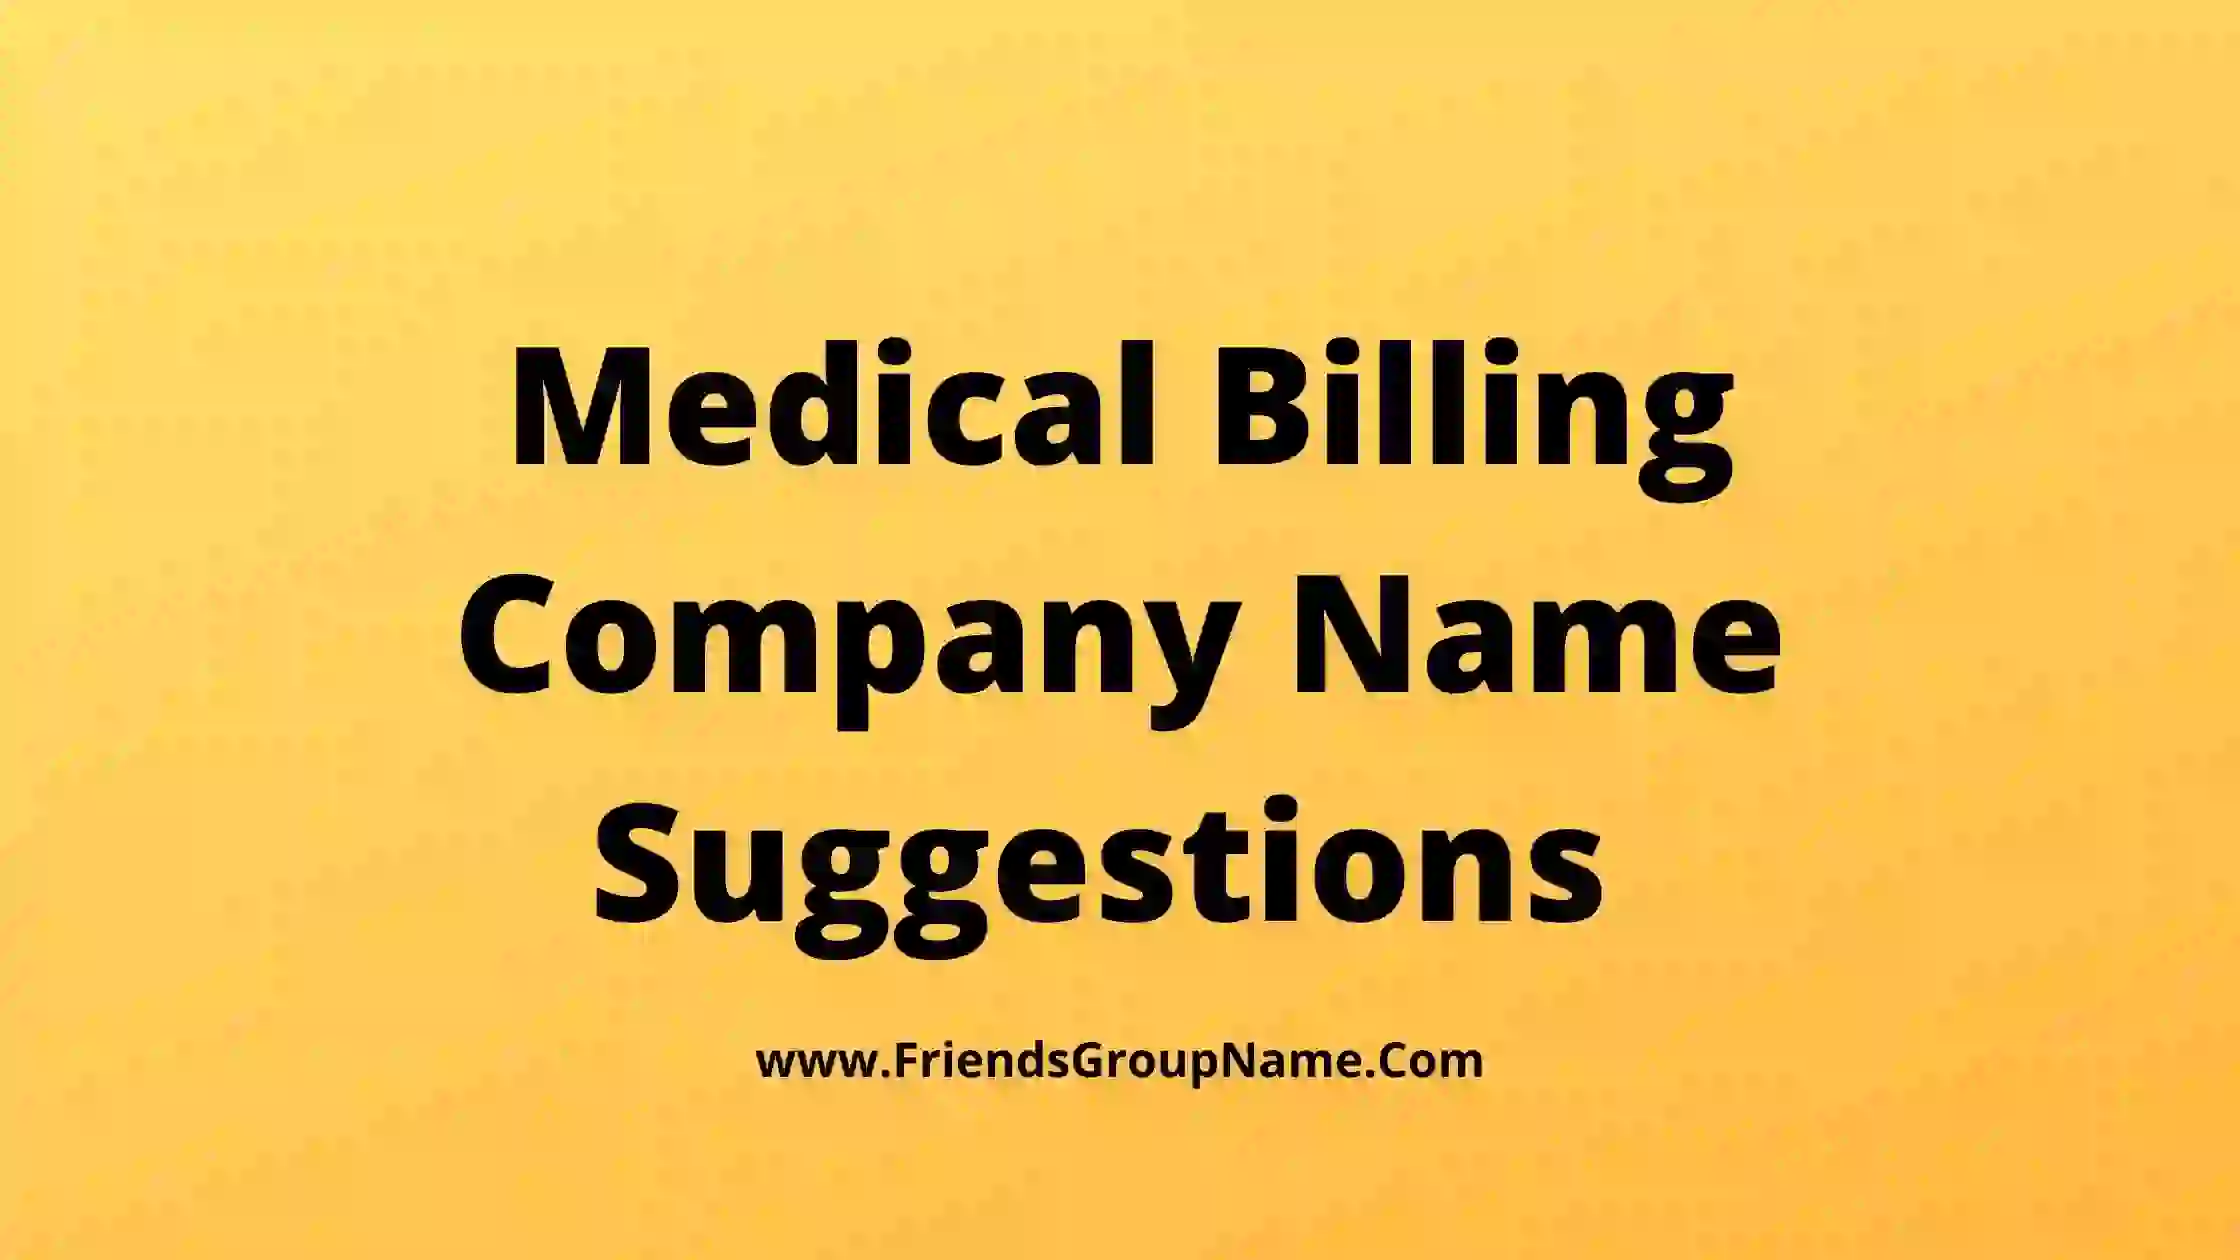 Medical Billing Company Name Suggestions